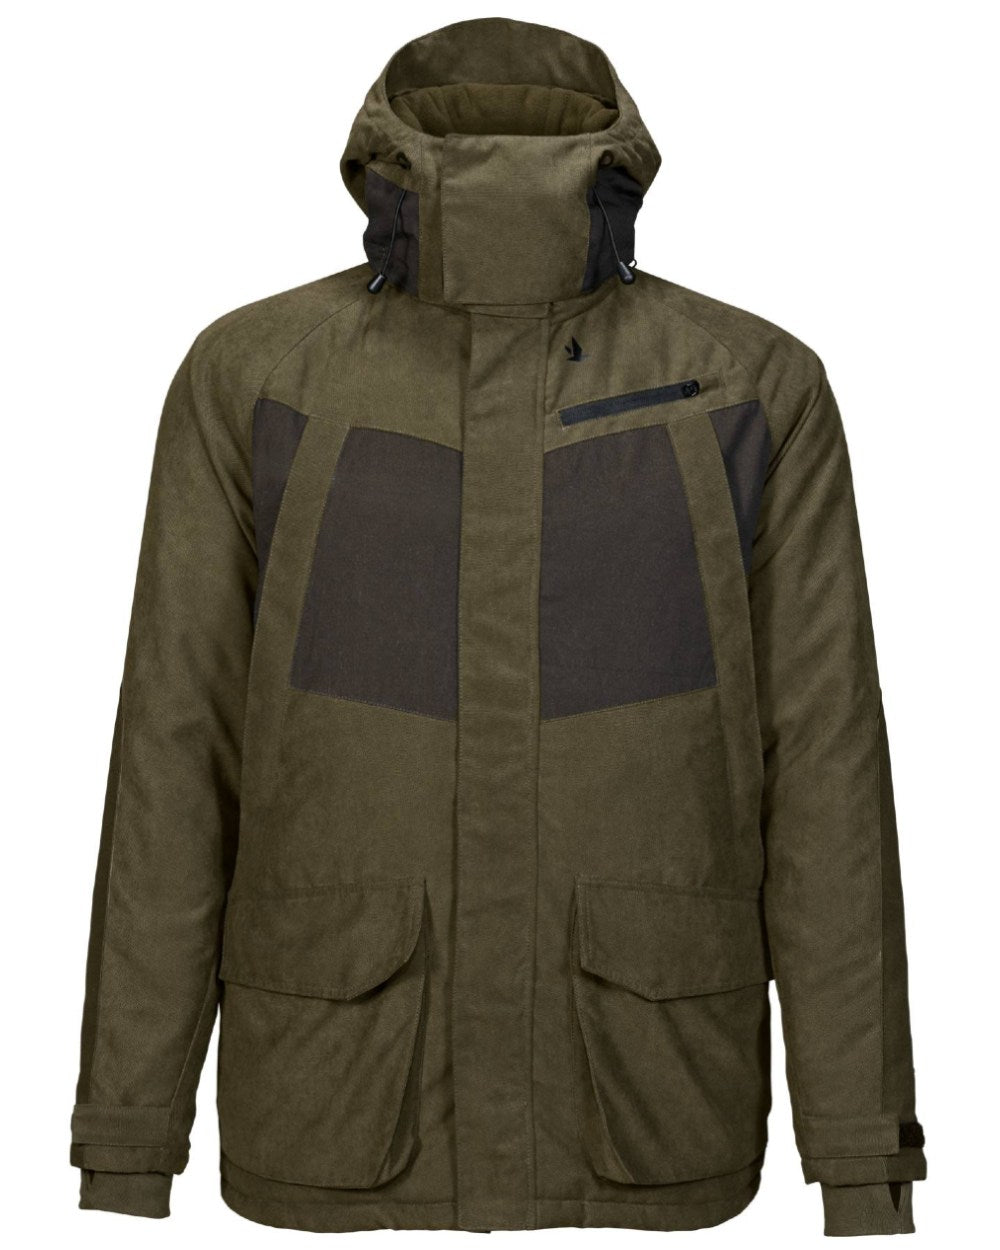 Grizzly Brown Coloured Seeland Dog Active Jacket On A White Background 